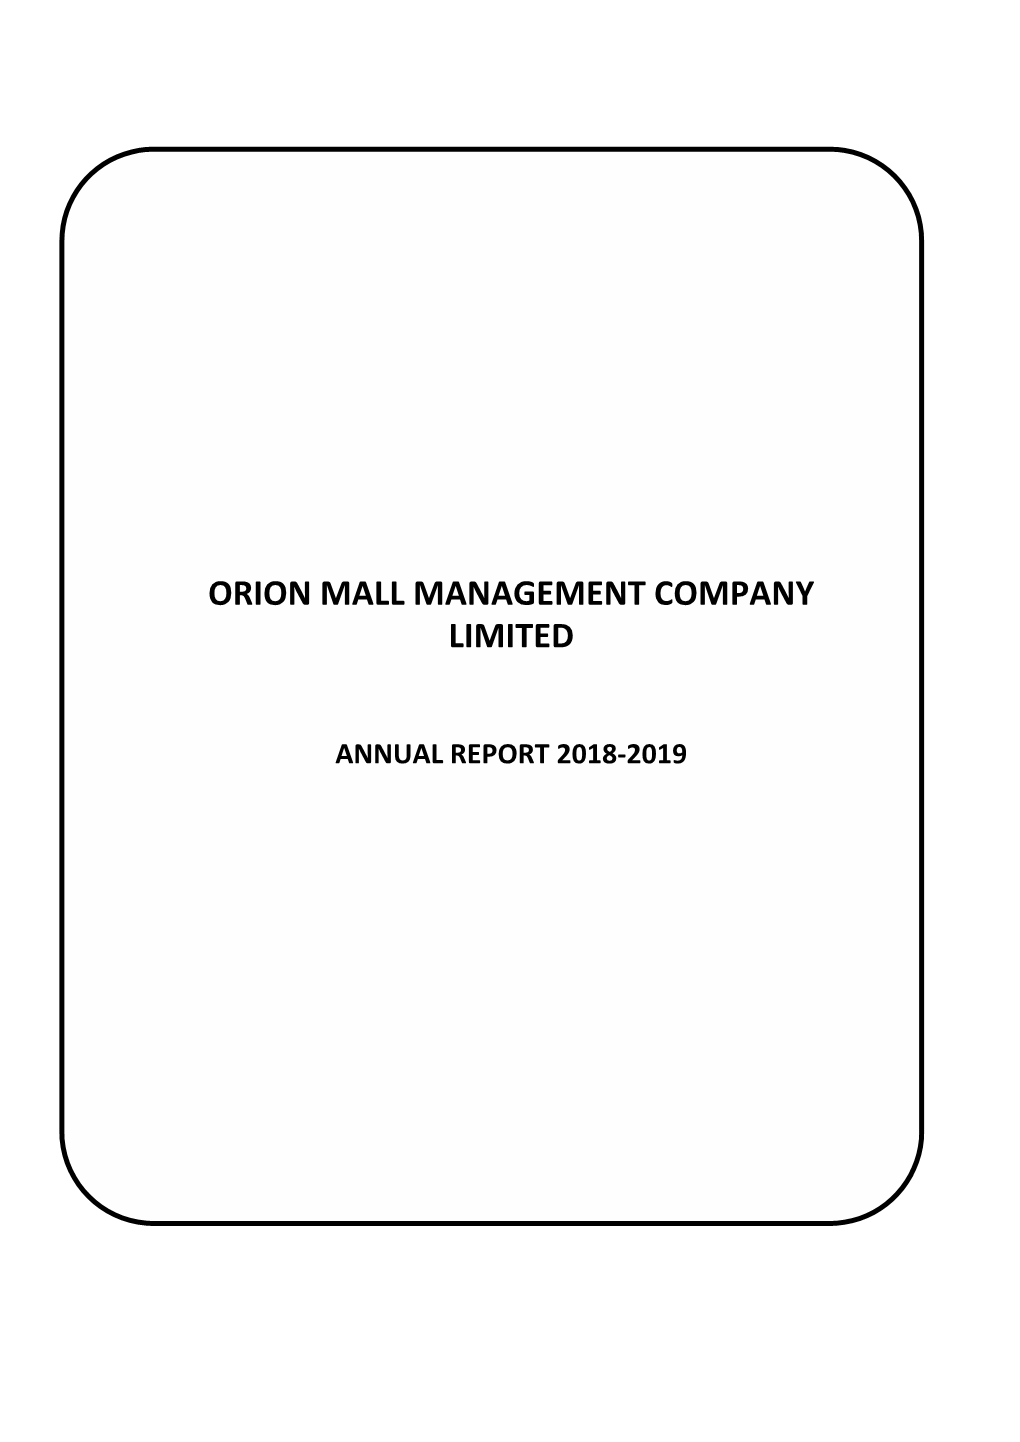 Orion Mall Management Company Limited